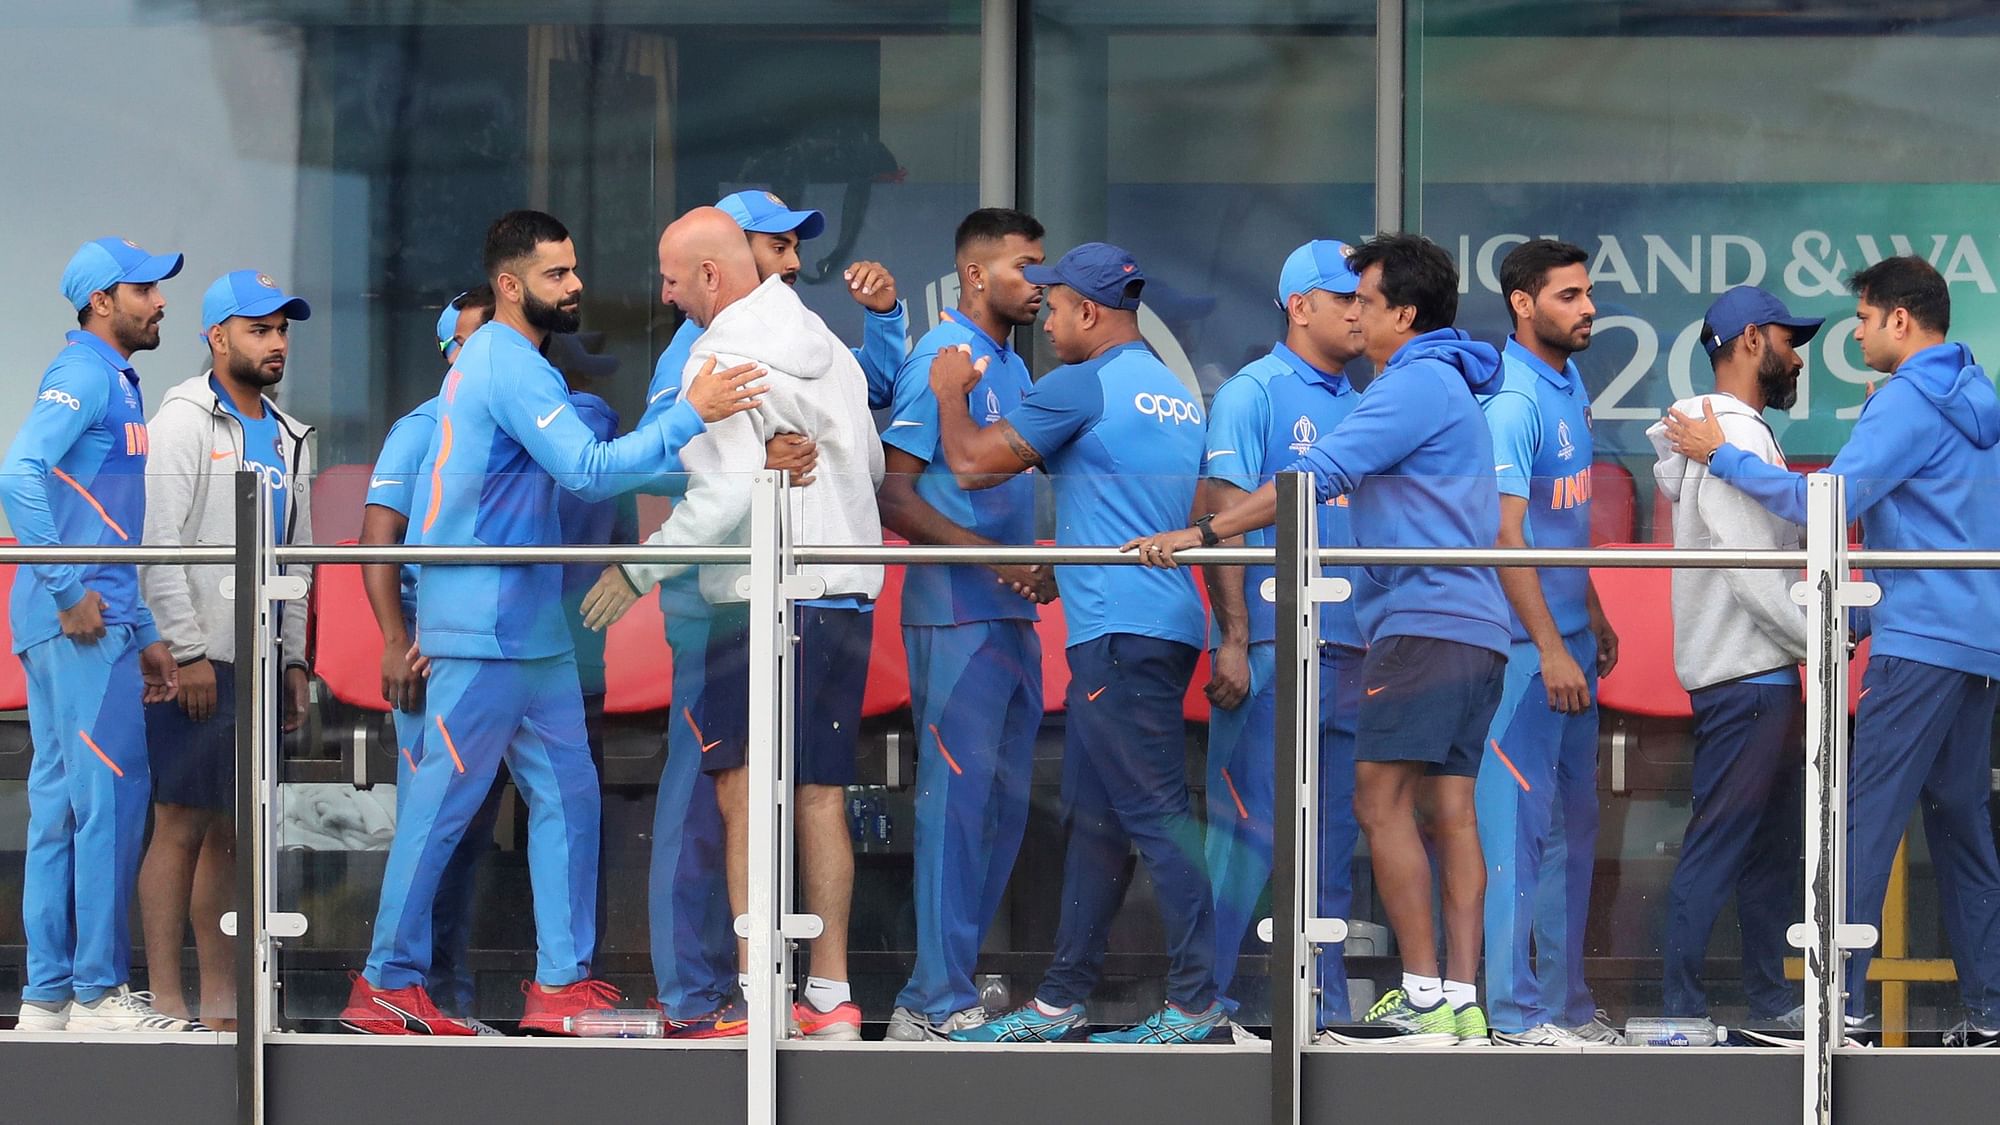 Indian team at the balcony of Old Trafford stadium.